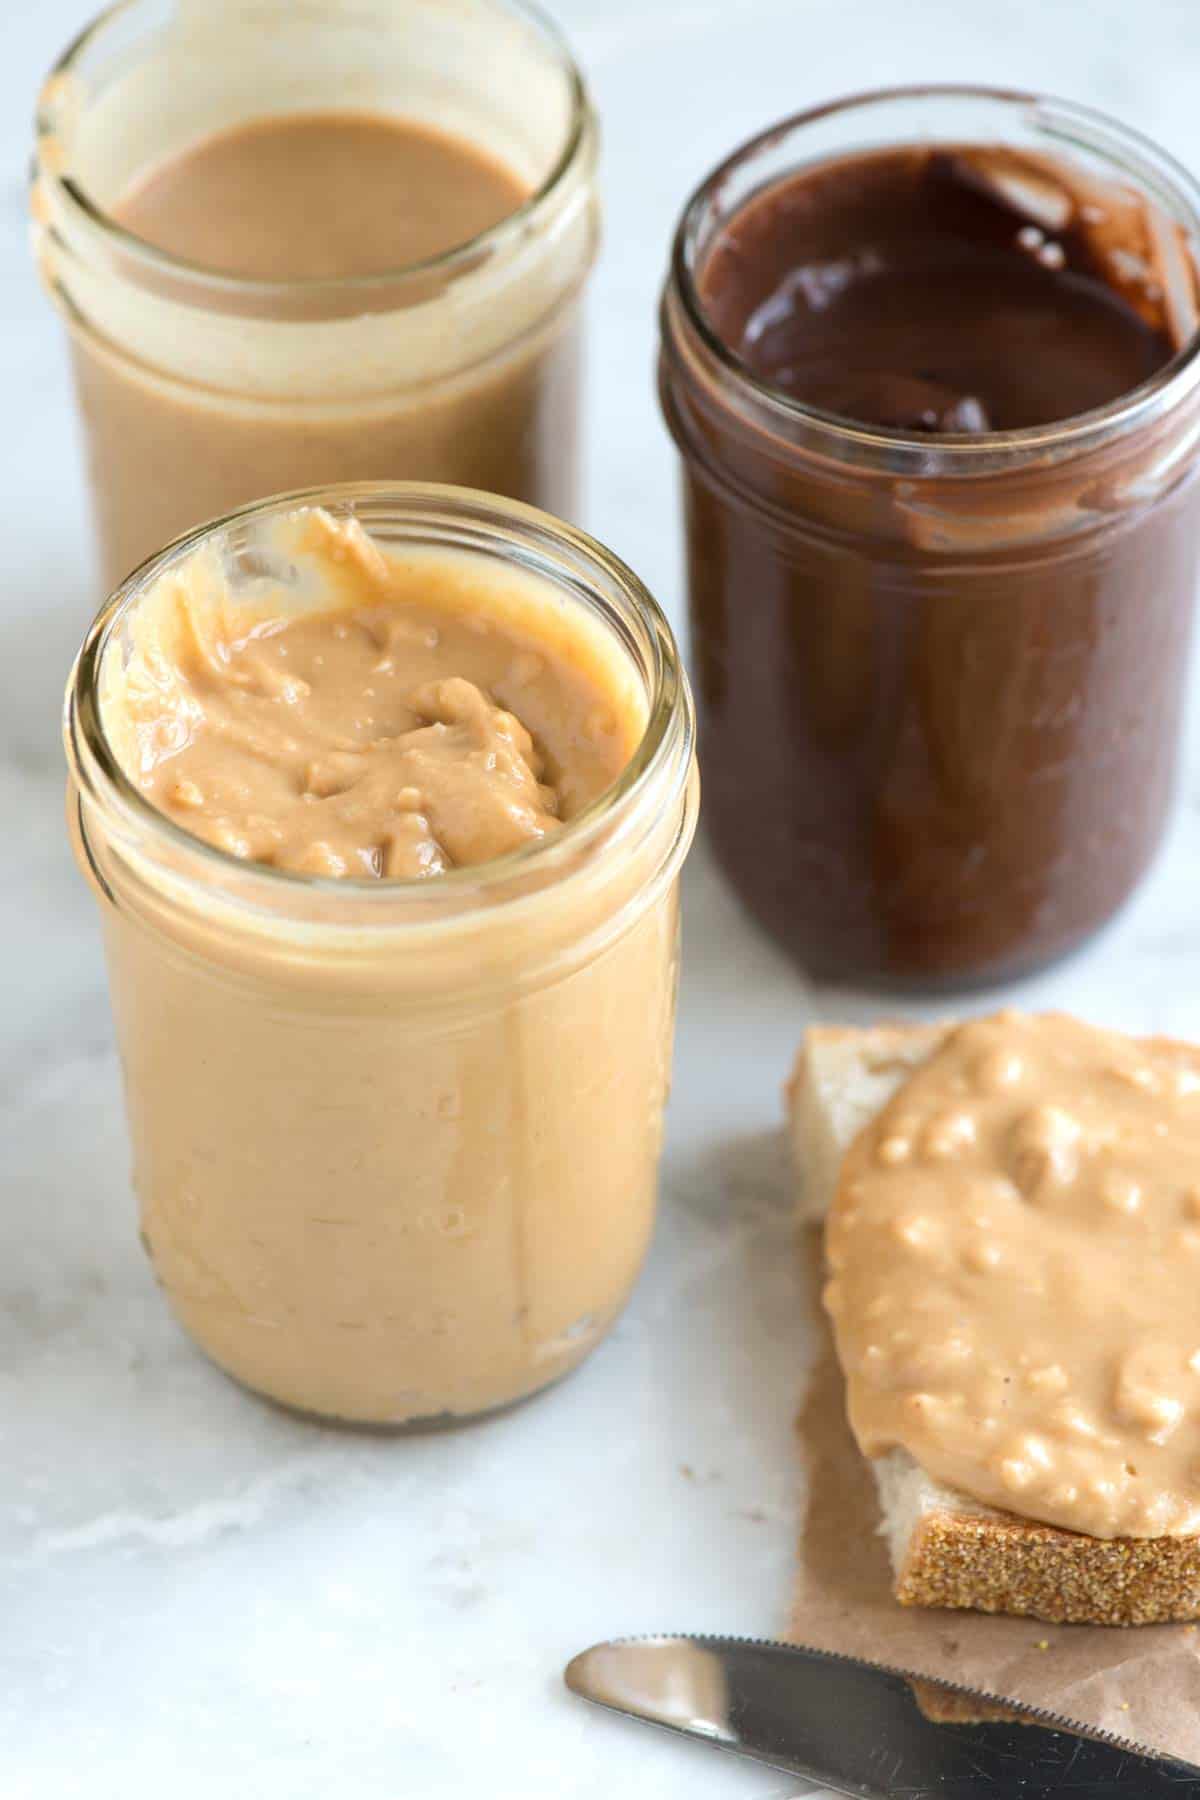 How to Make the Best Homemade Peanut Butter